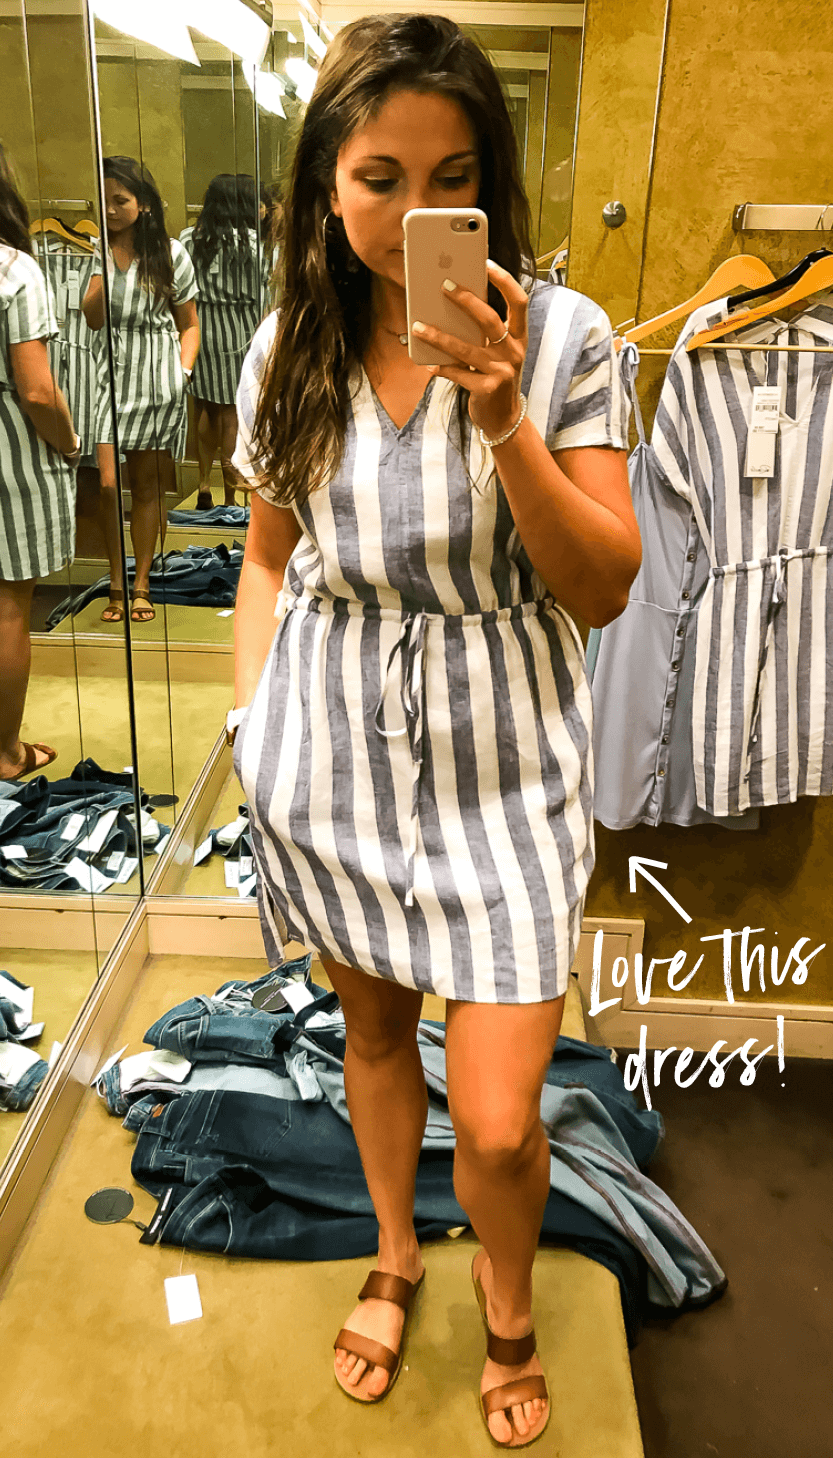 Photo of woman wearing a blue-grey and white striped cotton dress in a dressing room. White texts reads "love this dress!" with an arrow pointing to the dress.